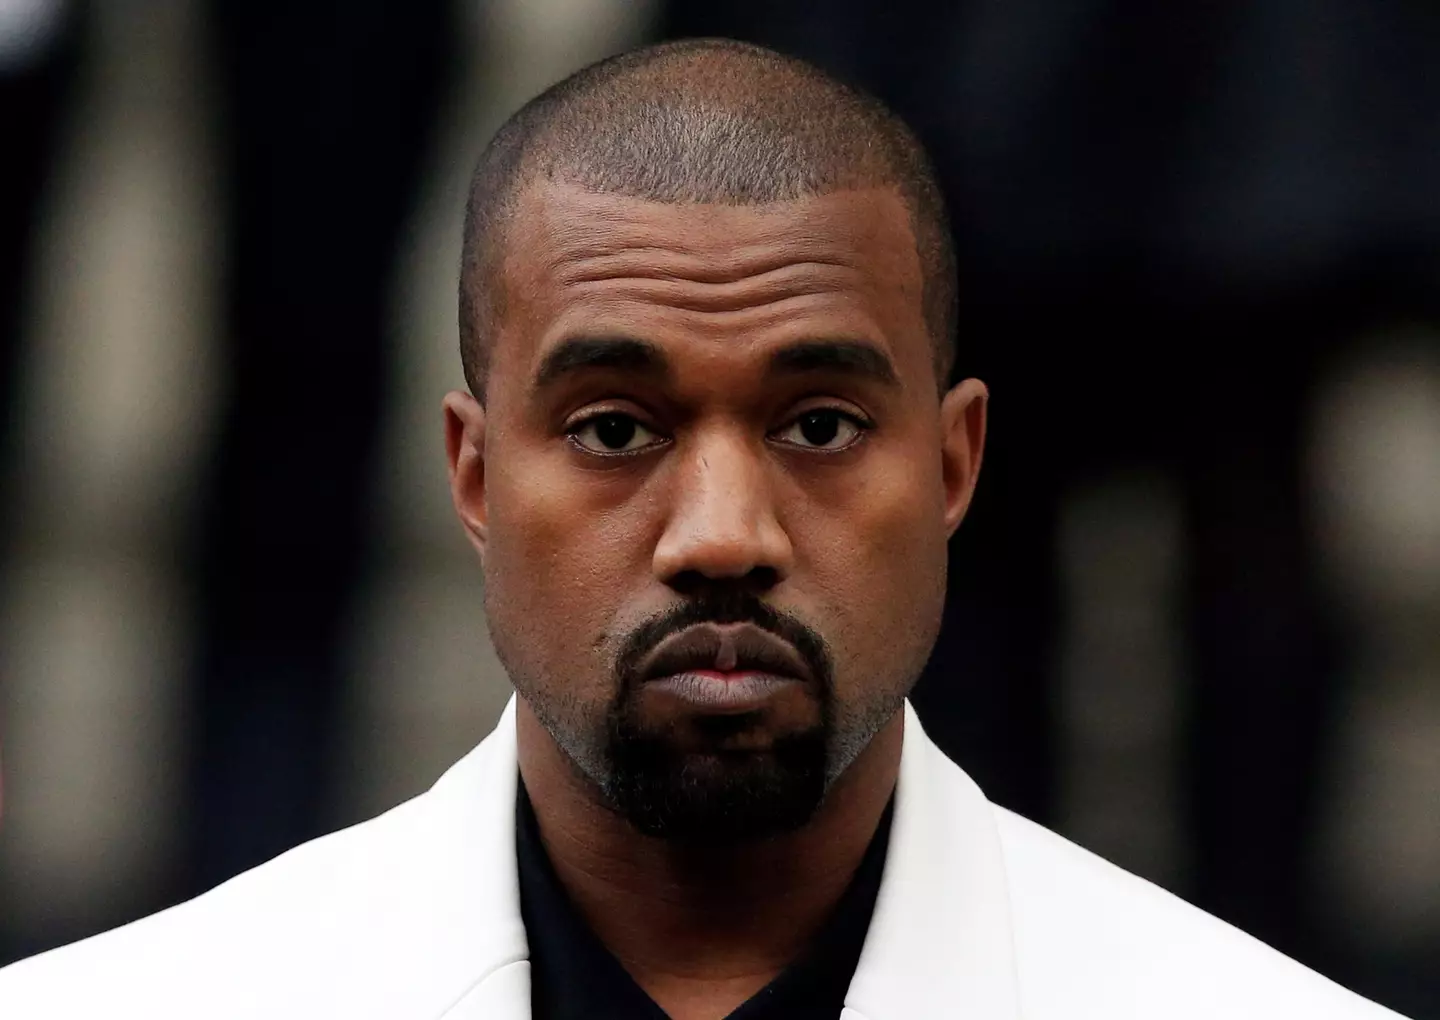 Kayne West has claimed his anti-semitic comments were an attempt to 'fight fire with fire'.